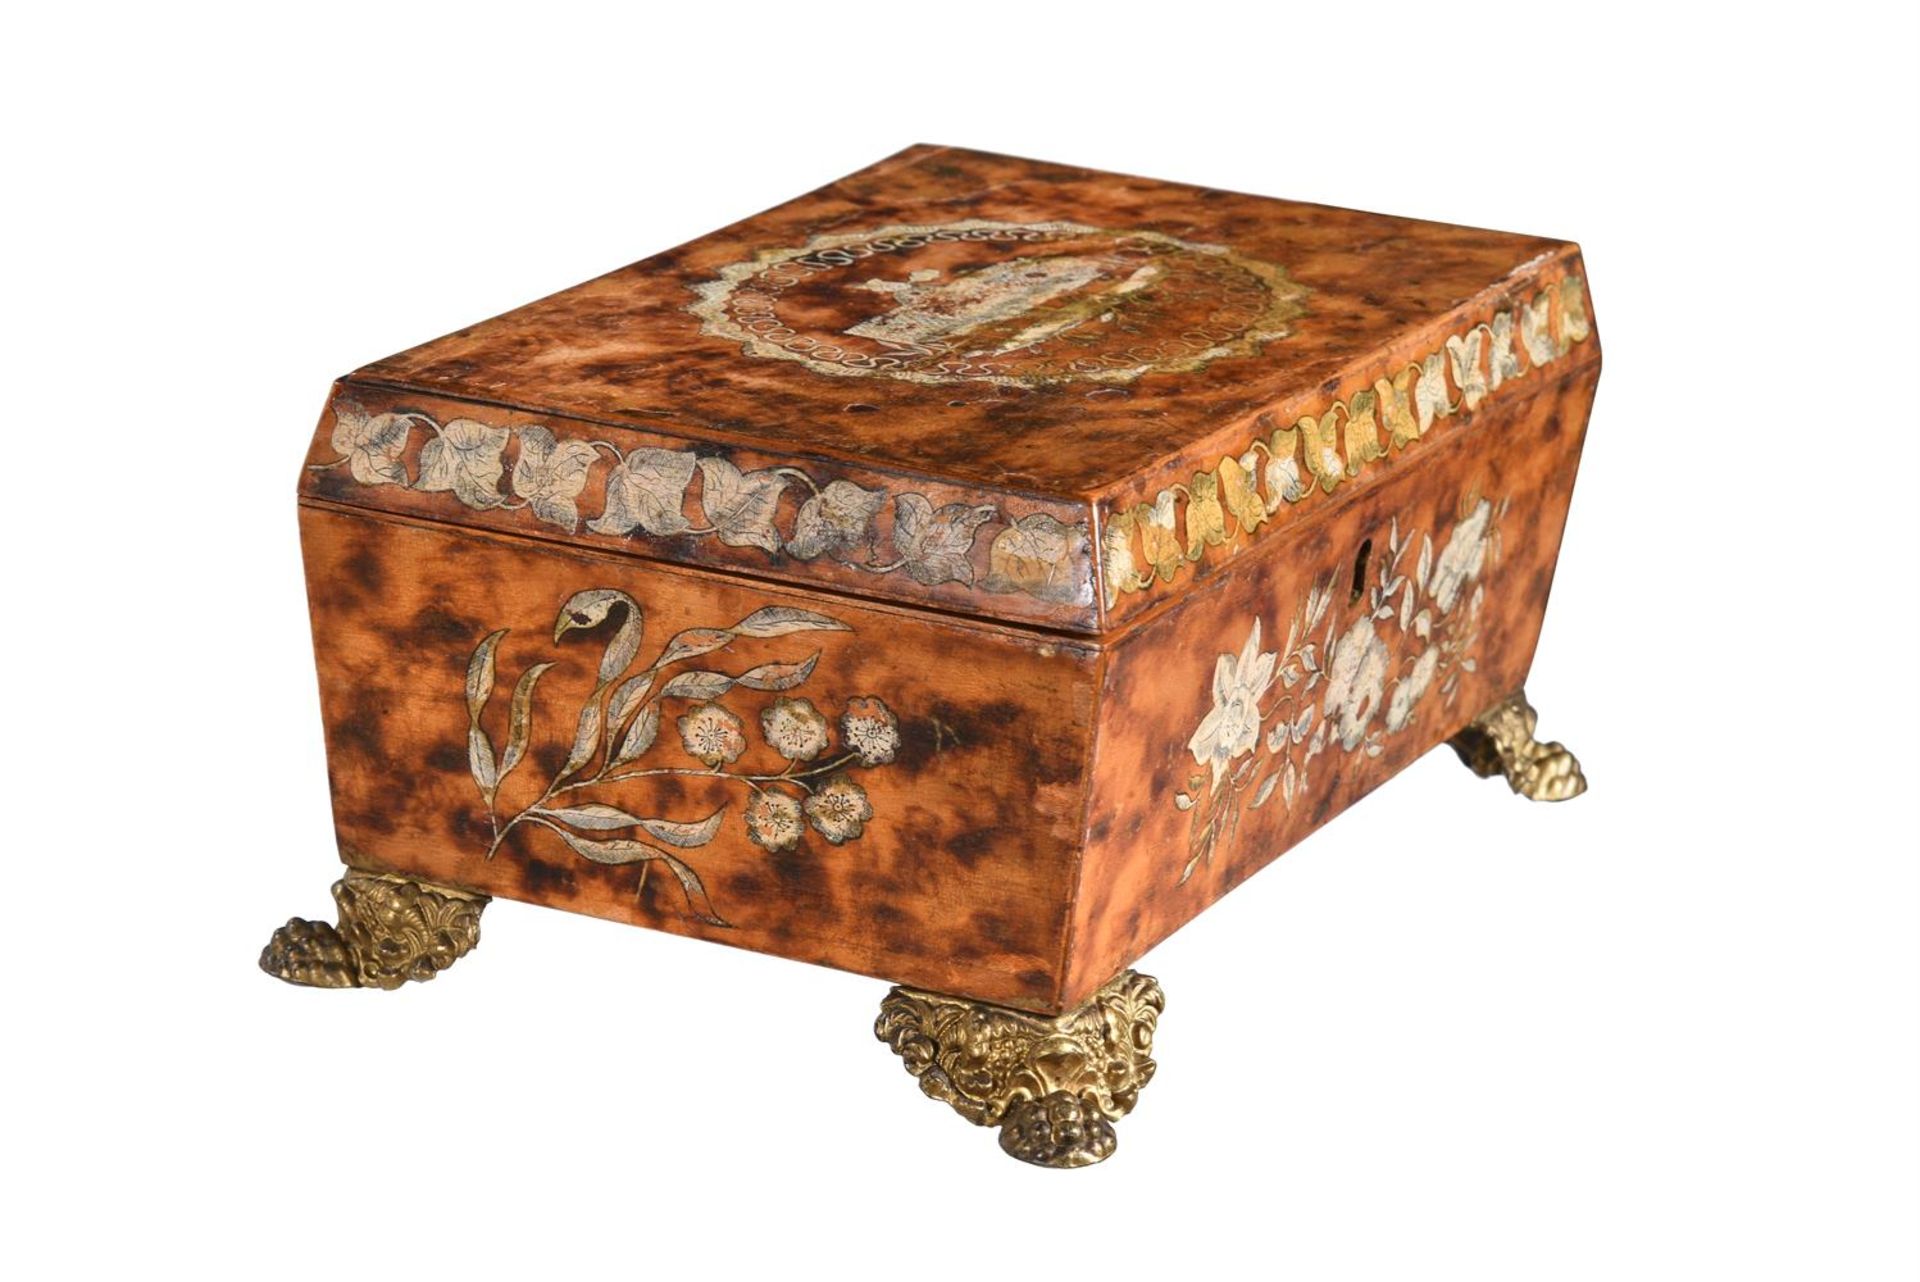 A REGENCY PAINTED FAUX BLONDE TORTOISESHELL WORKBOX, EARLY 19TH CENTURY - Image 3 of 4